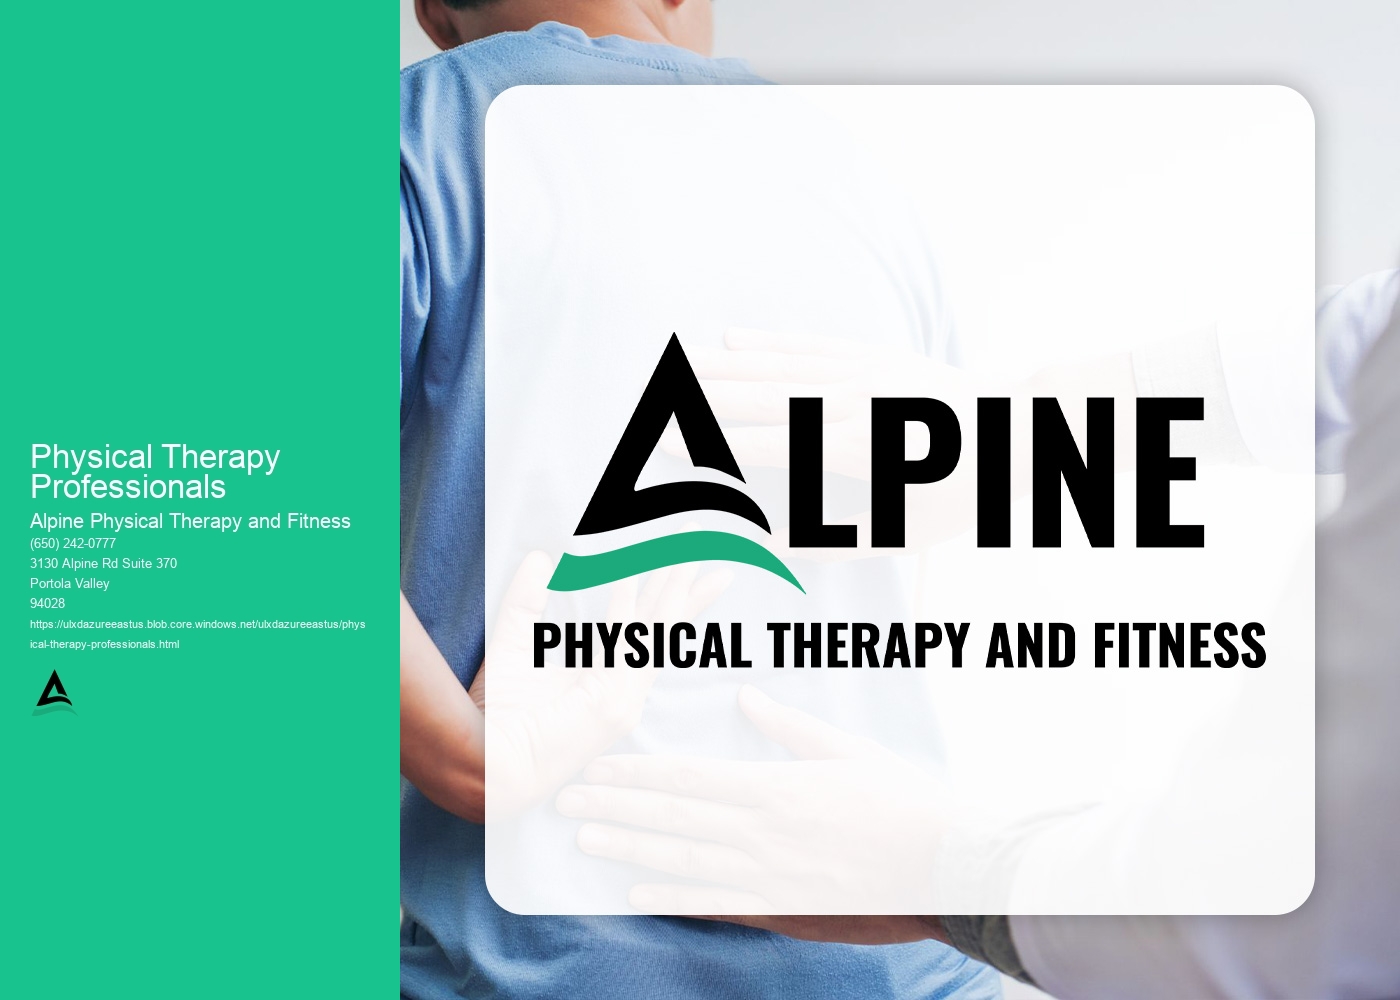 What are the benefits of incorporating aquatic therapy into a physical therapy program?